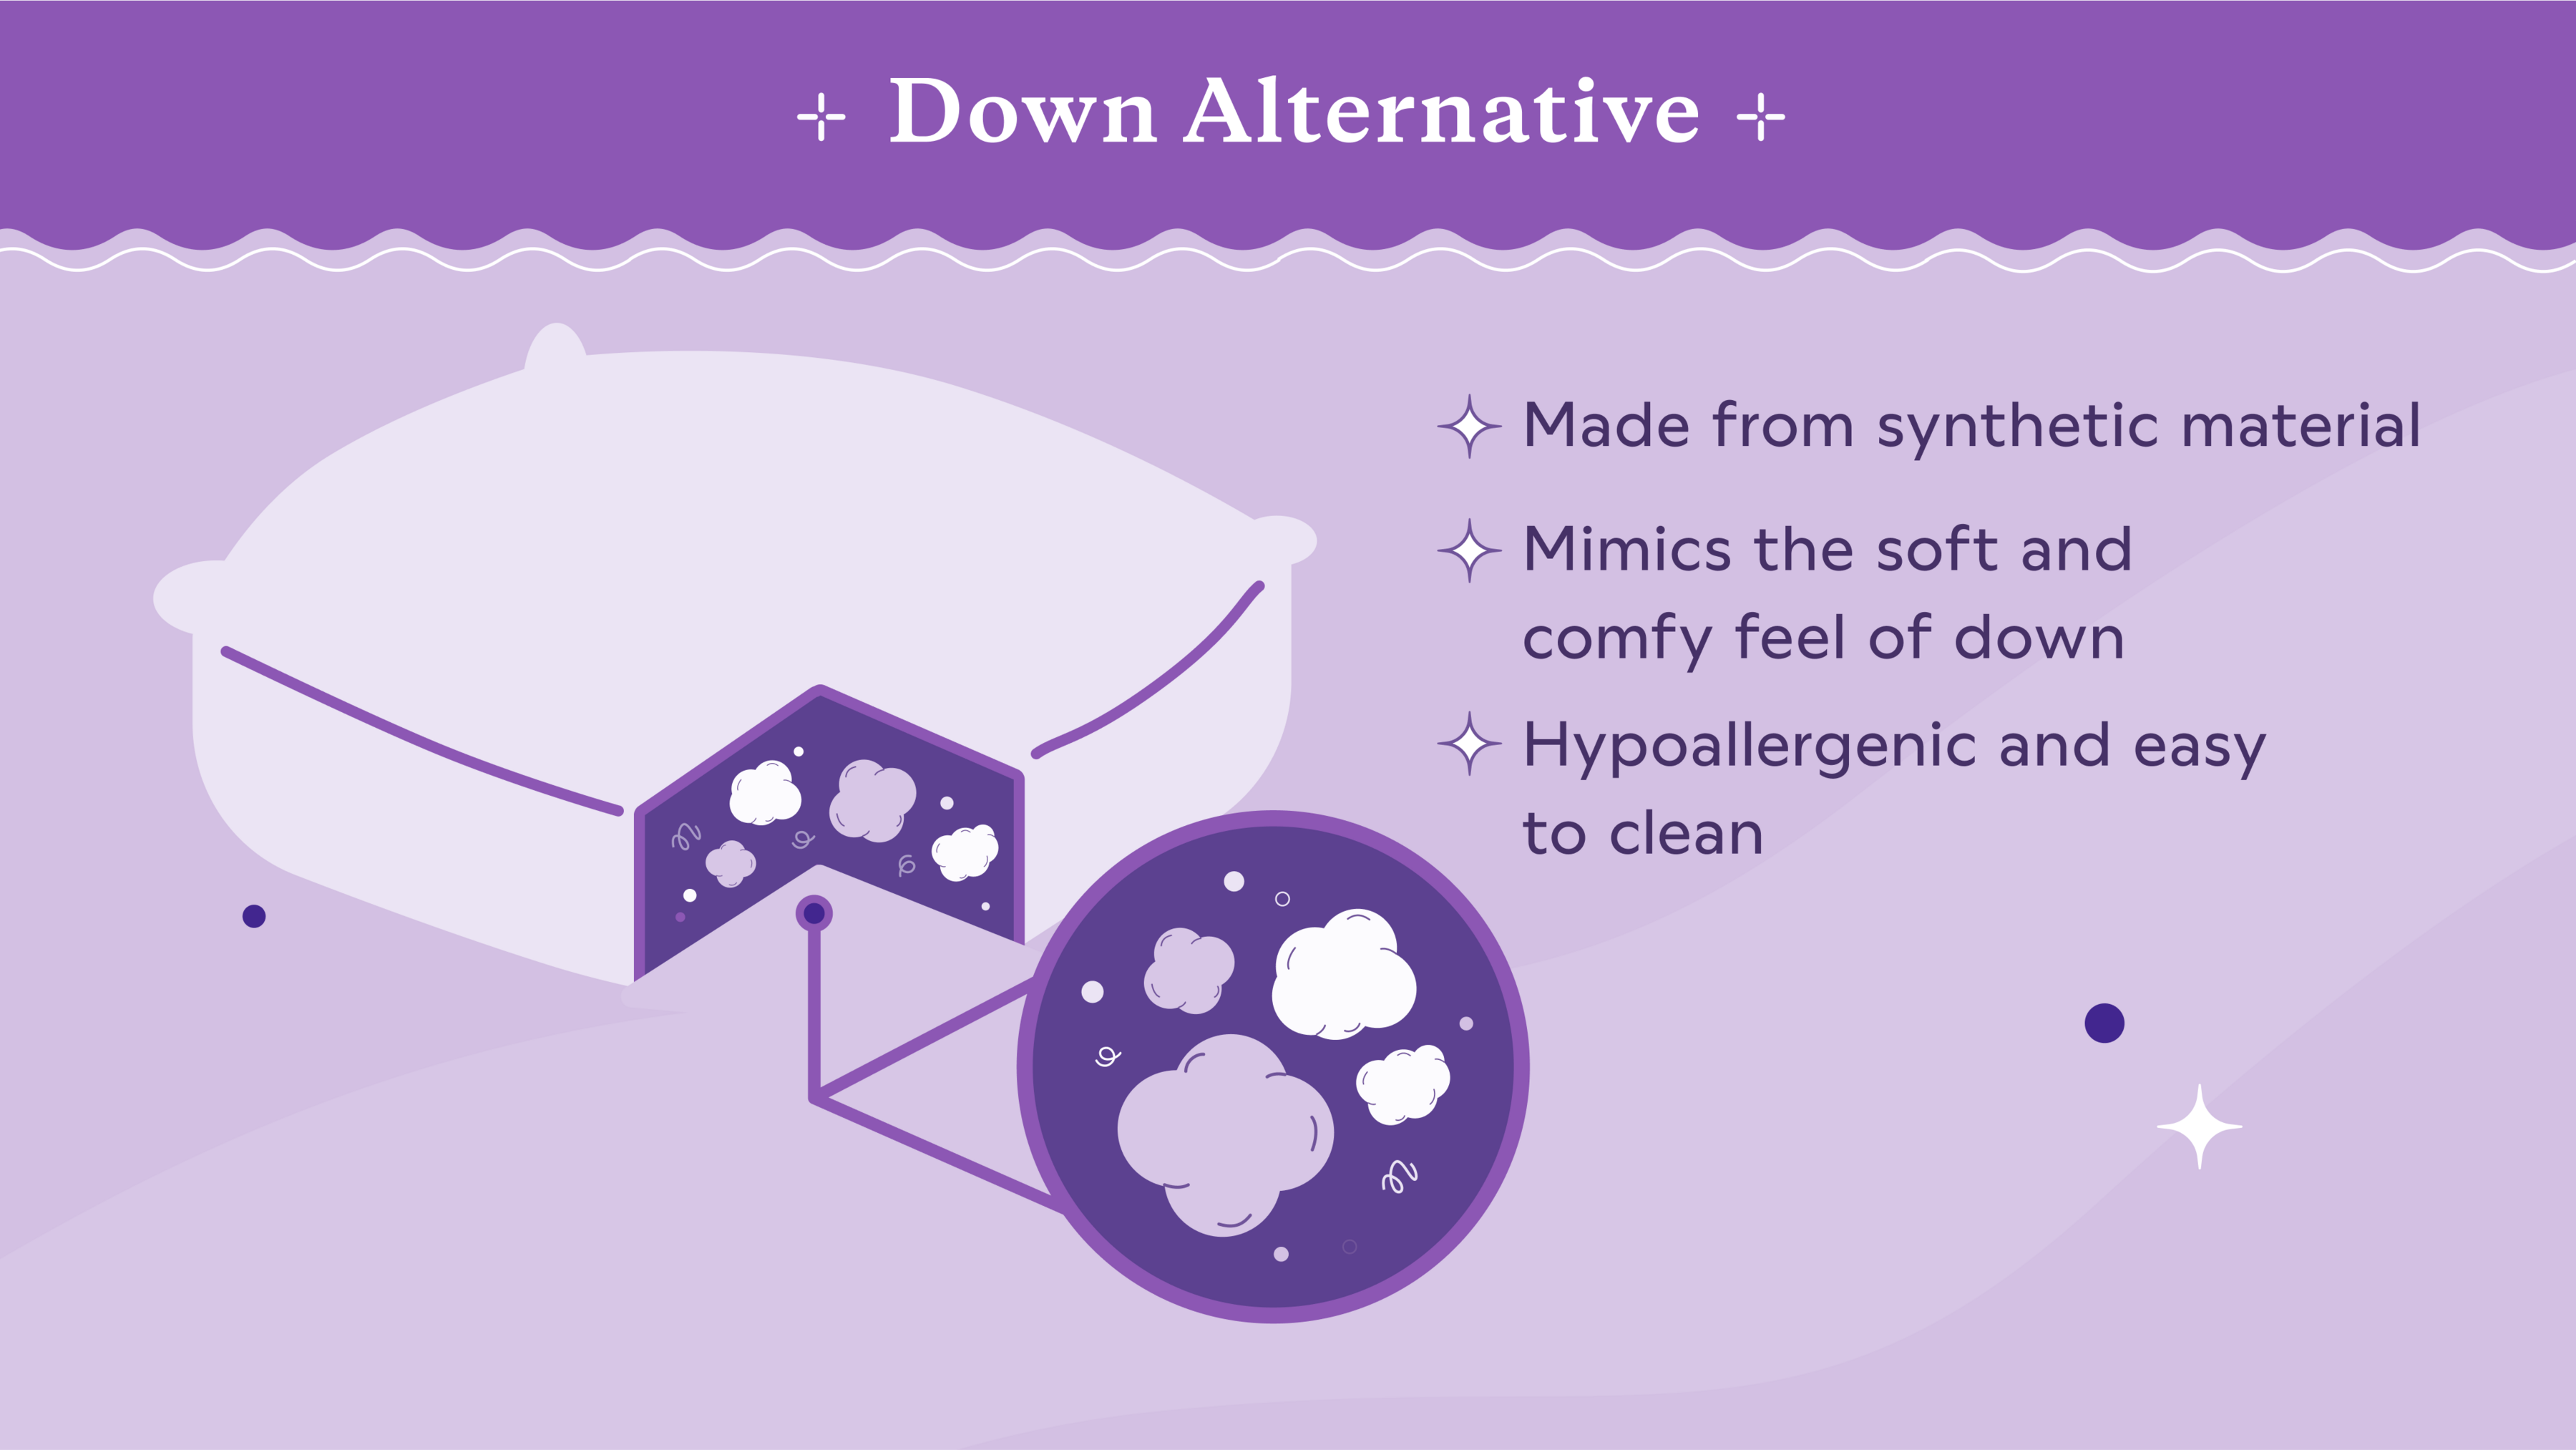 down alternative pillow with down alternative benefits listed